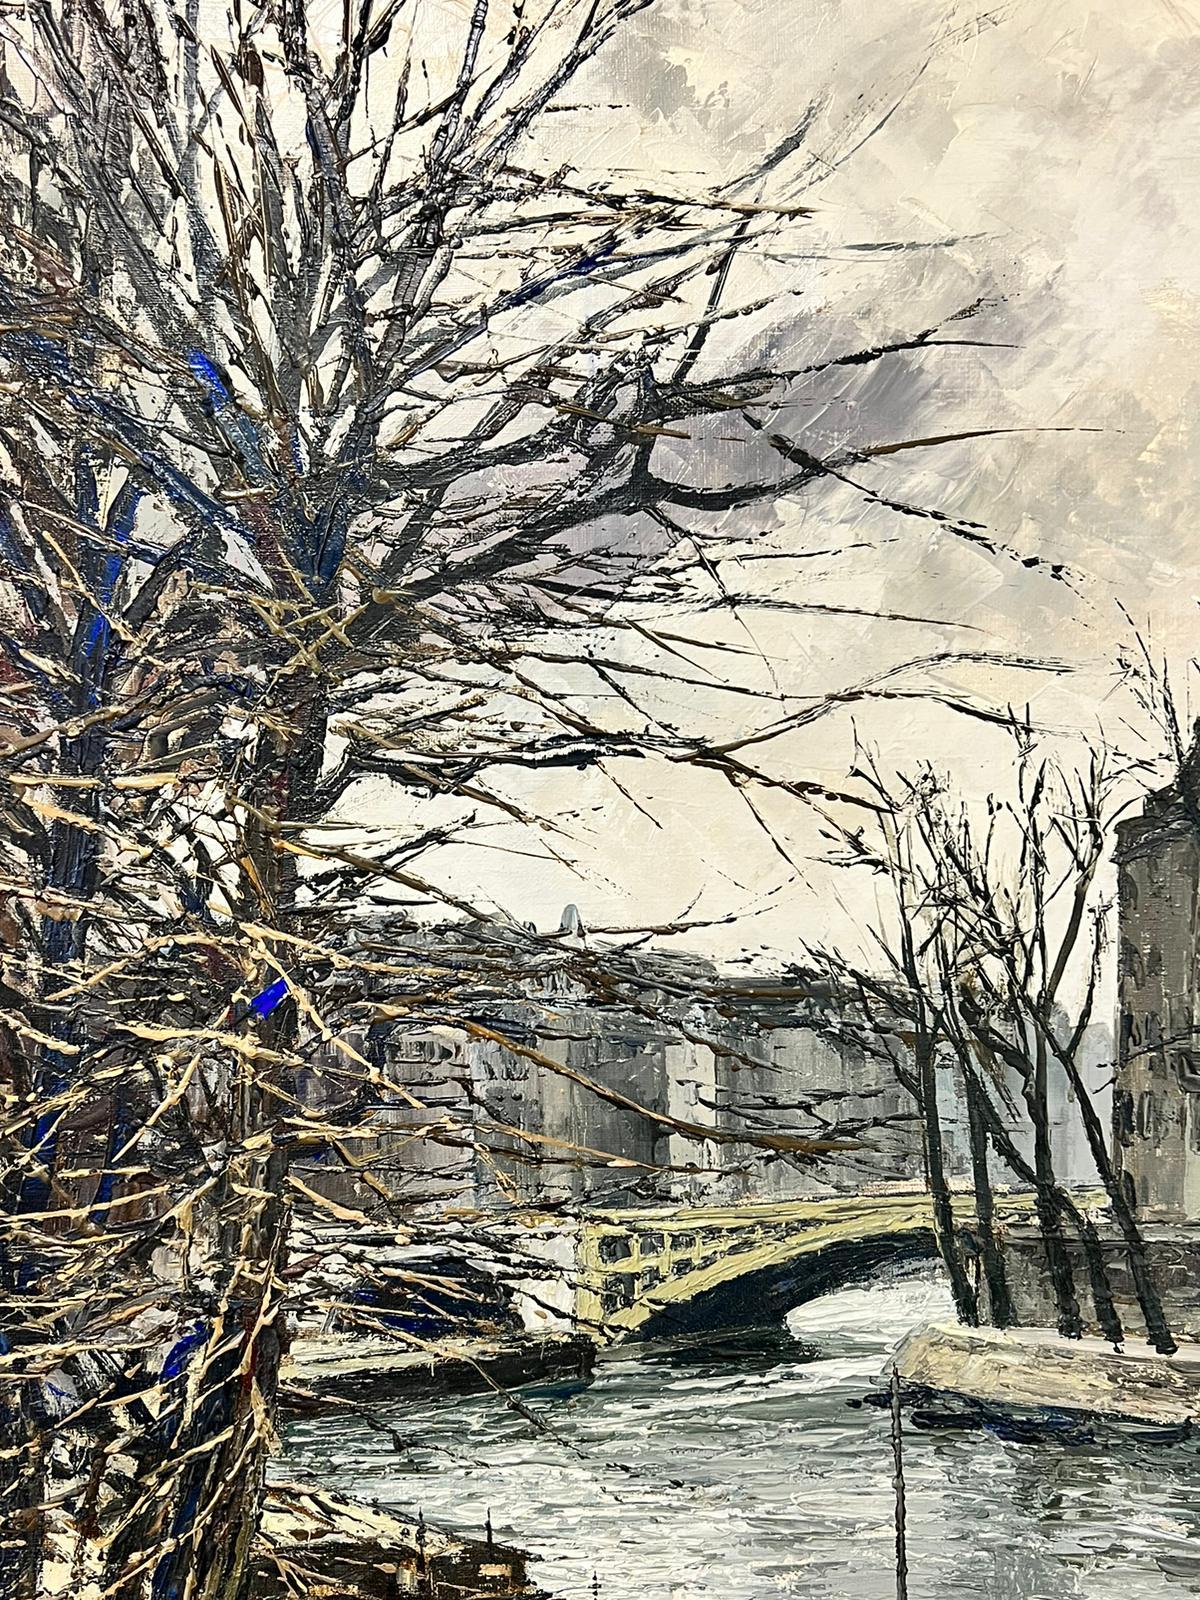 Winter in Paris
signed by Josine Vignon (French 1922-2022) 
oil painting on canvas, unframed
inscribed verso
canvas: 36 x 29 inches
very good condition
provenance: the artists estate, Paris

Josine Vignon (1922-2022) was a French artist living on